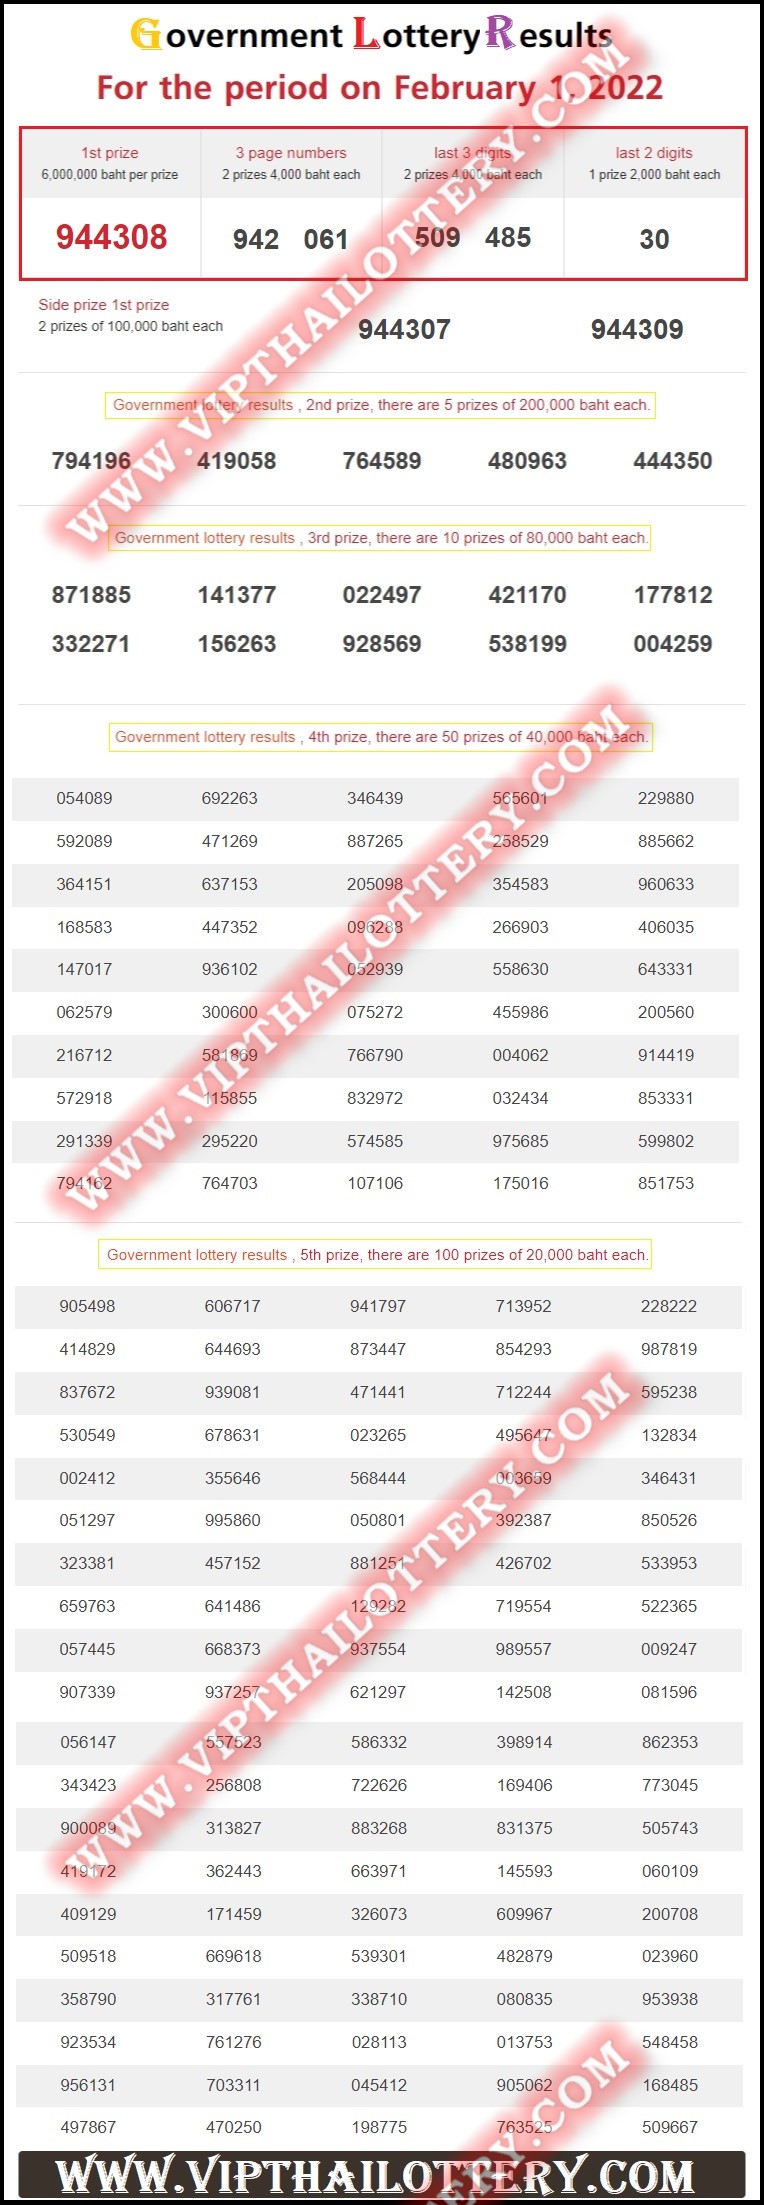 Thailand Lottery Results Winner 01-02-2022